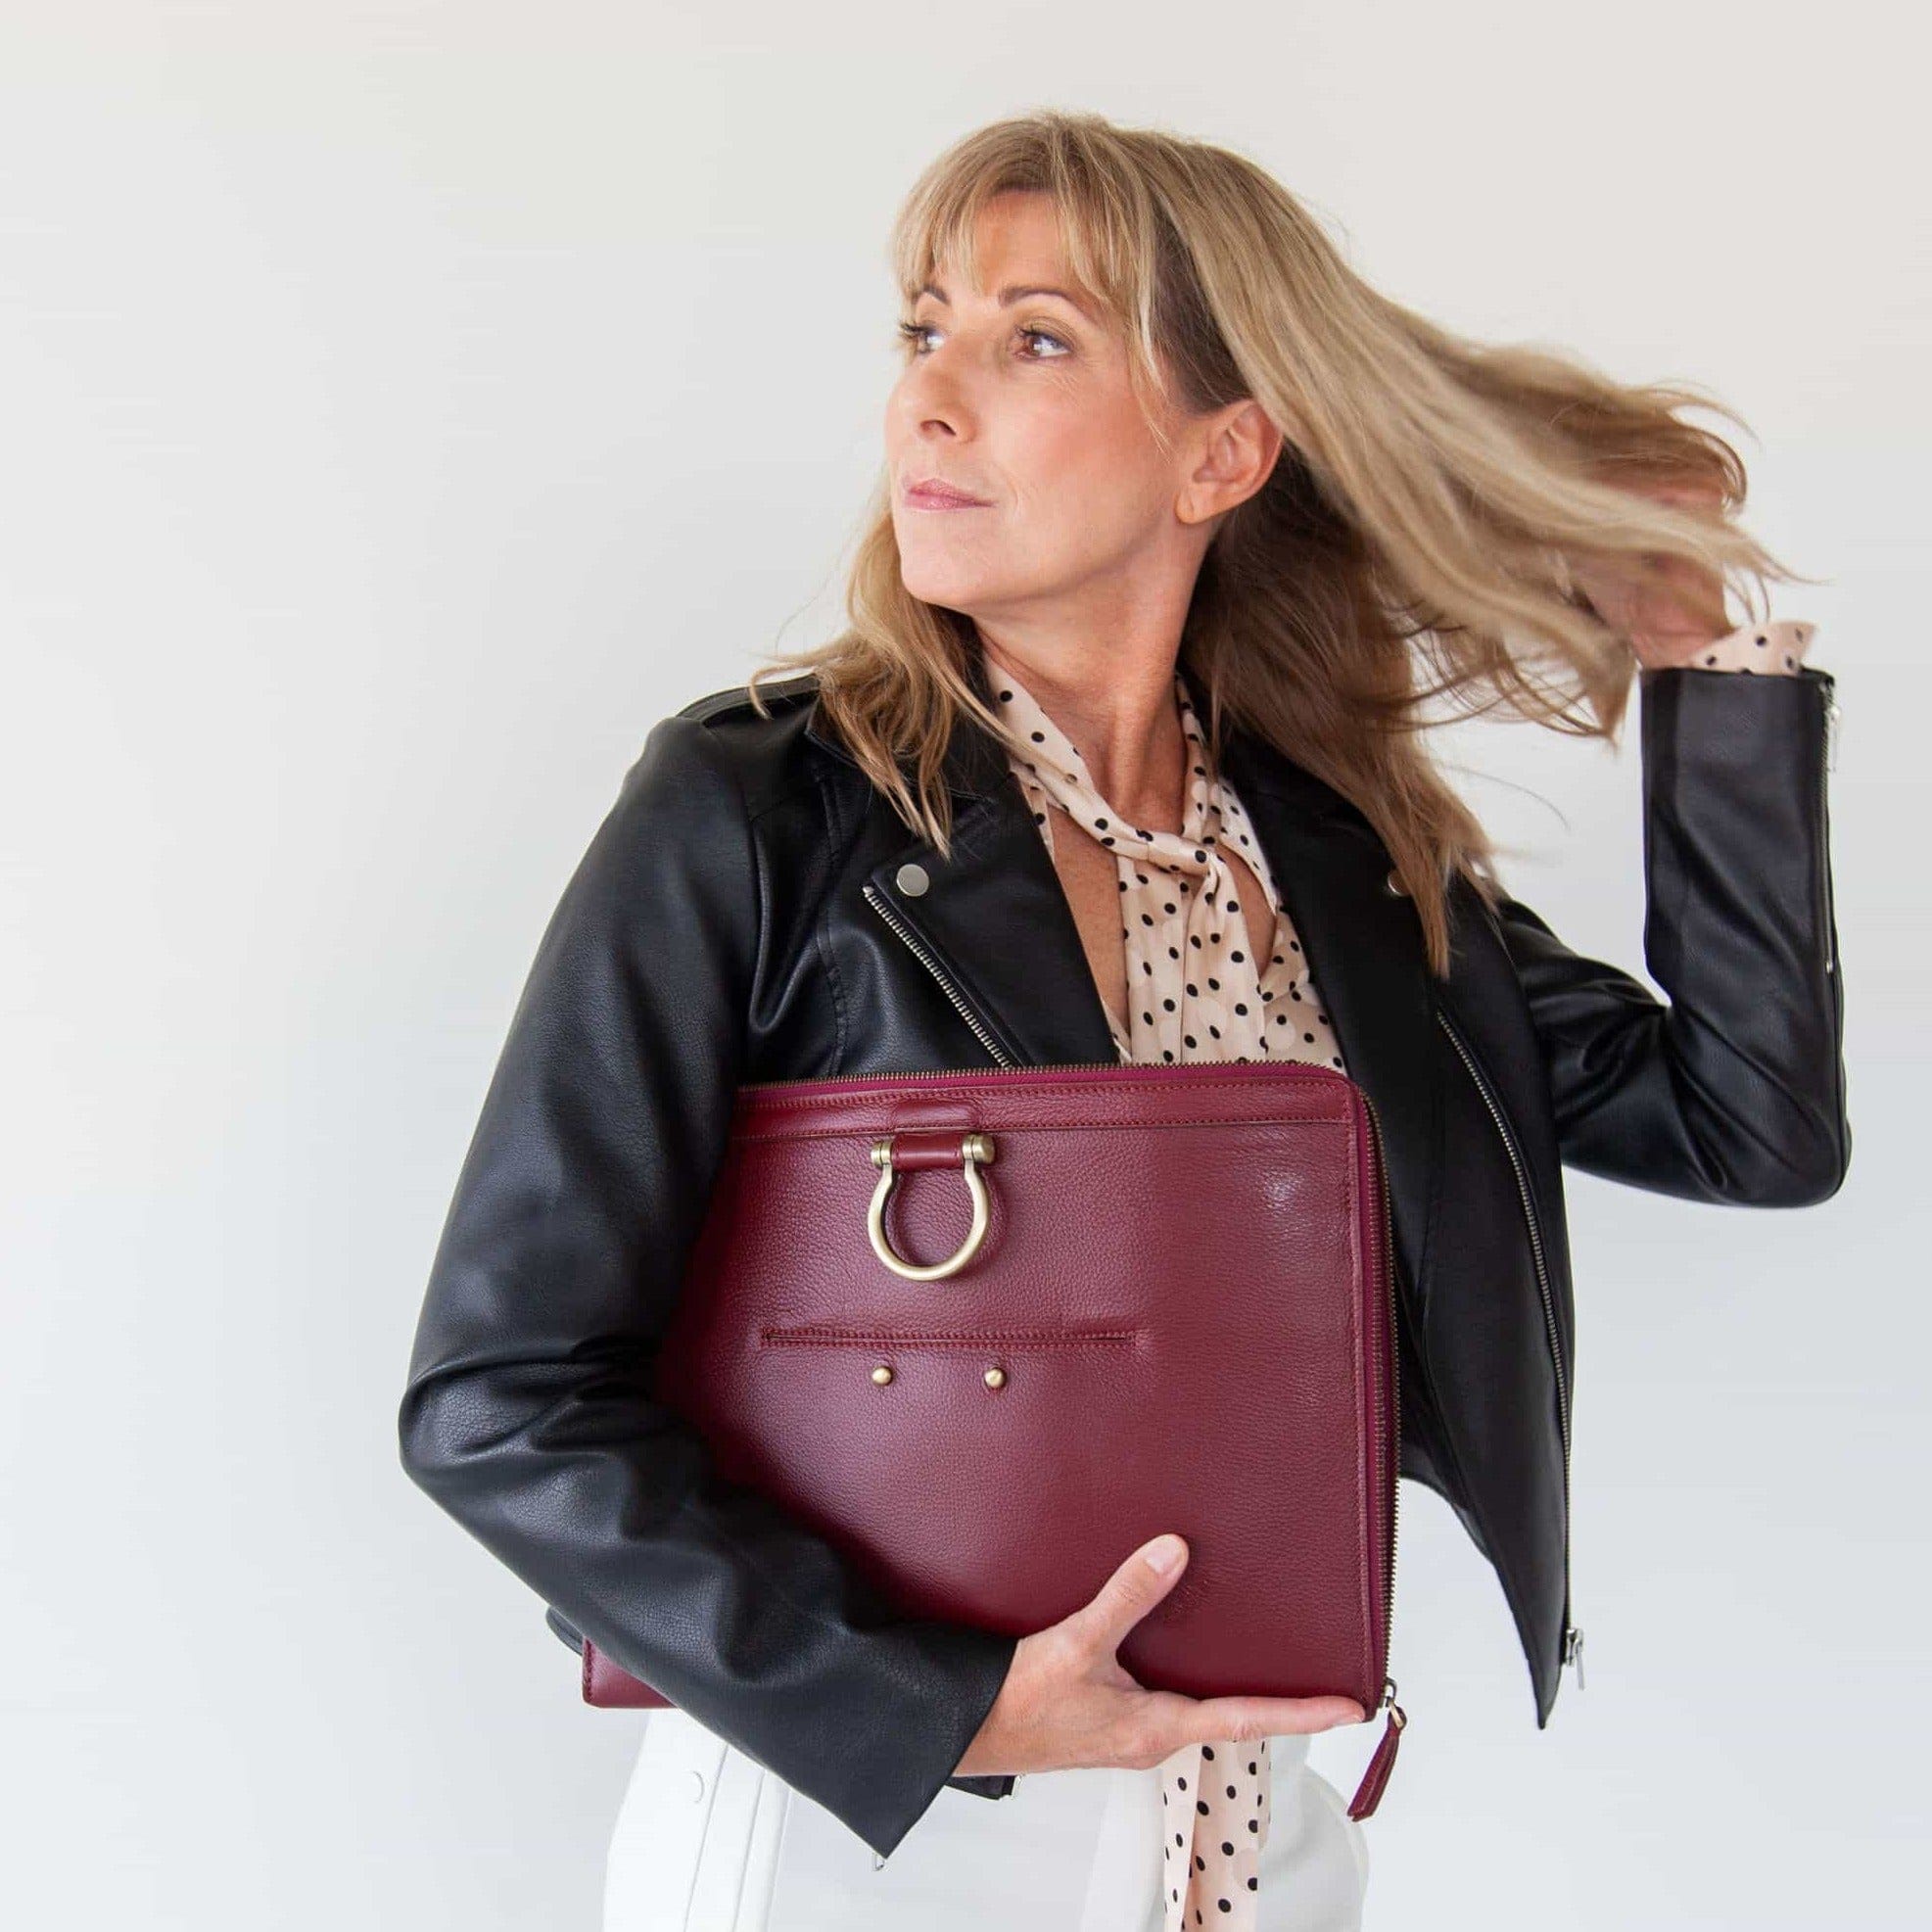 Carry the M large crossbody bag in deep red oil leather like a clutch.